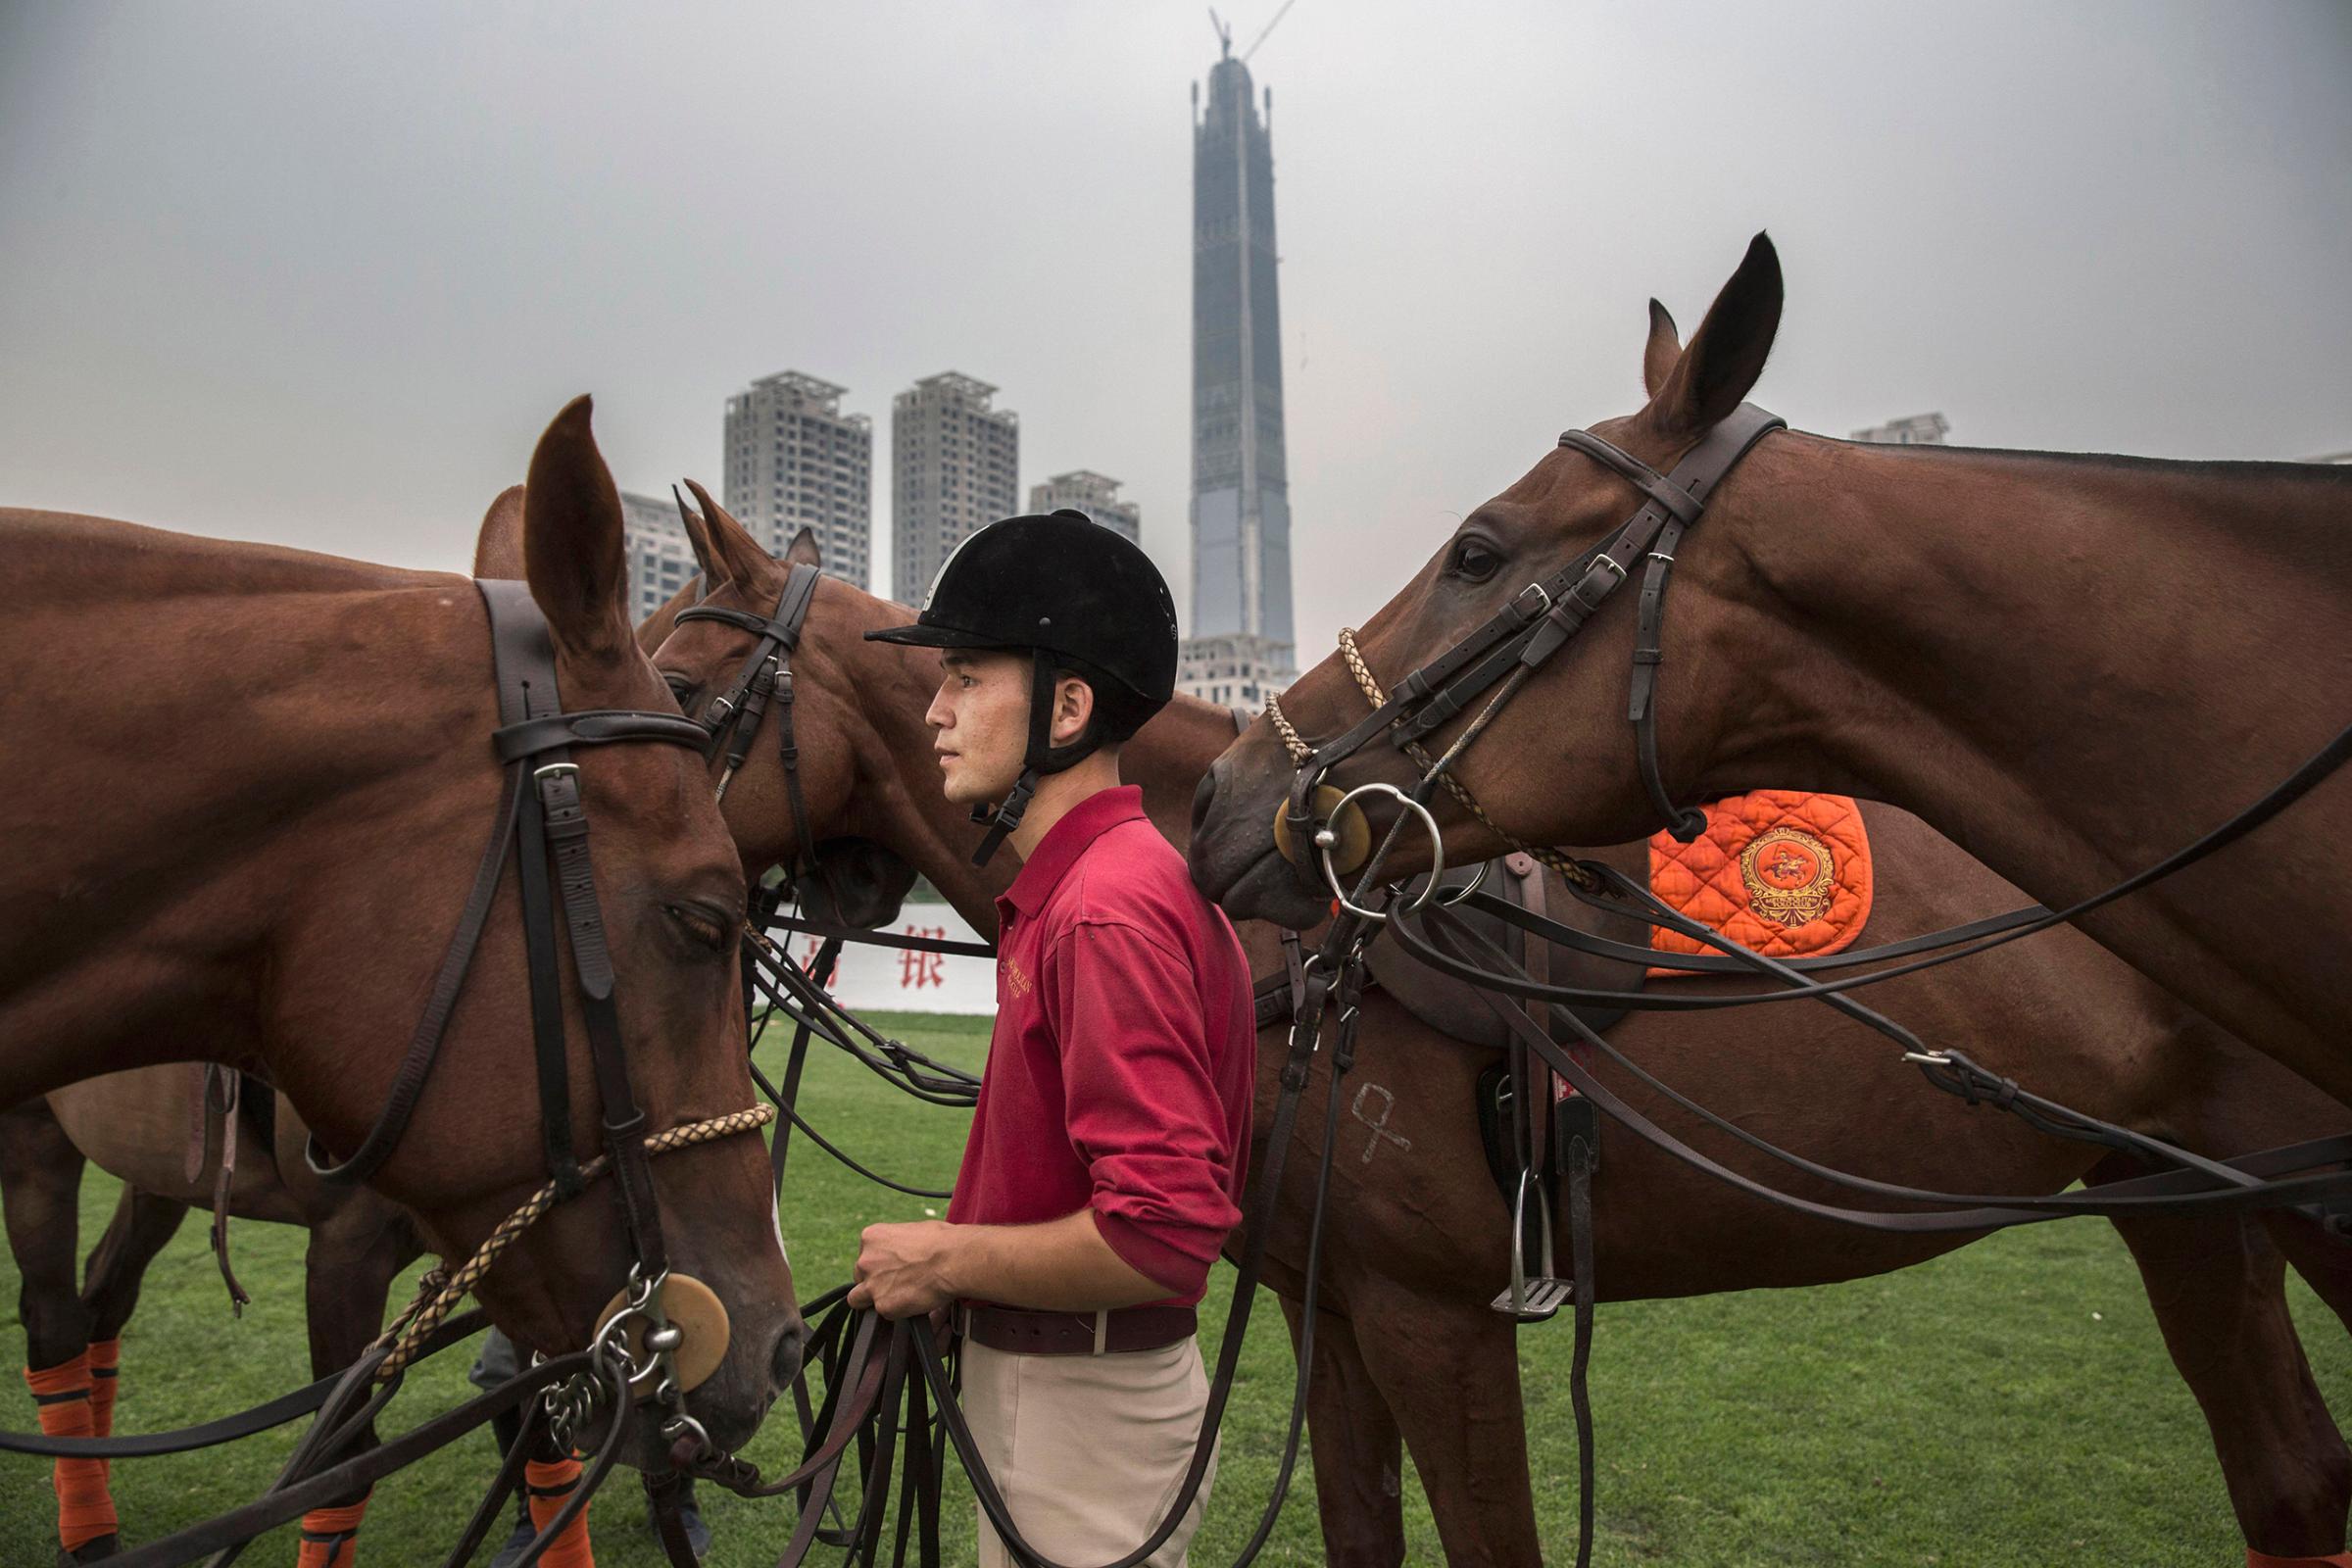 A horse trainer stands with polo horses during an intervarsity tournament match at the Tianjin Goldin Metropolitan Polo Club in Tianjin, China, on July 16, 2016.